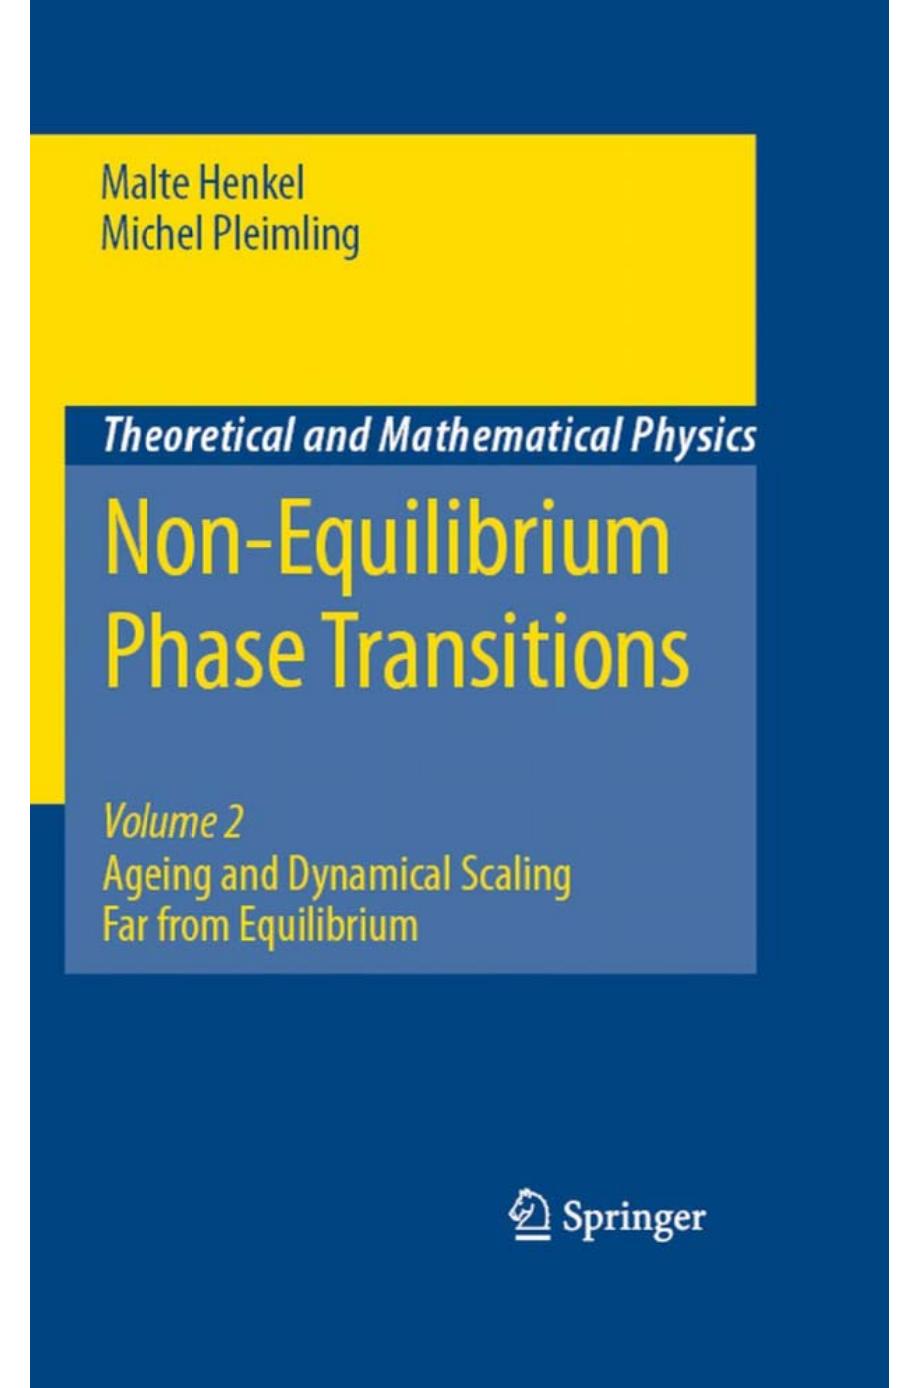 Non-Equilibrium Phase Transitions: Volume 2: Ageing and Dynamical Scaling Far From Equilibrium